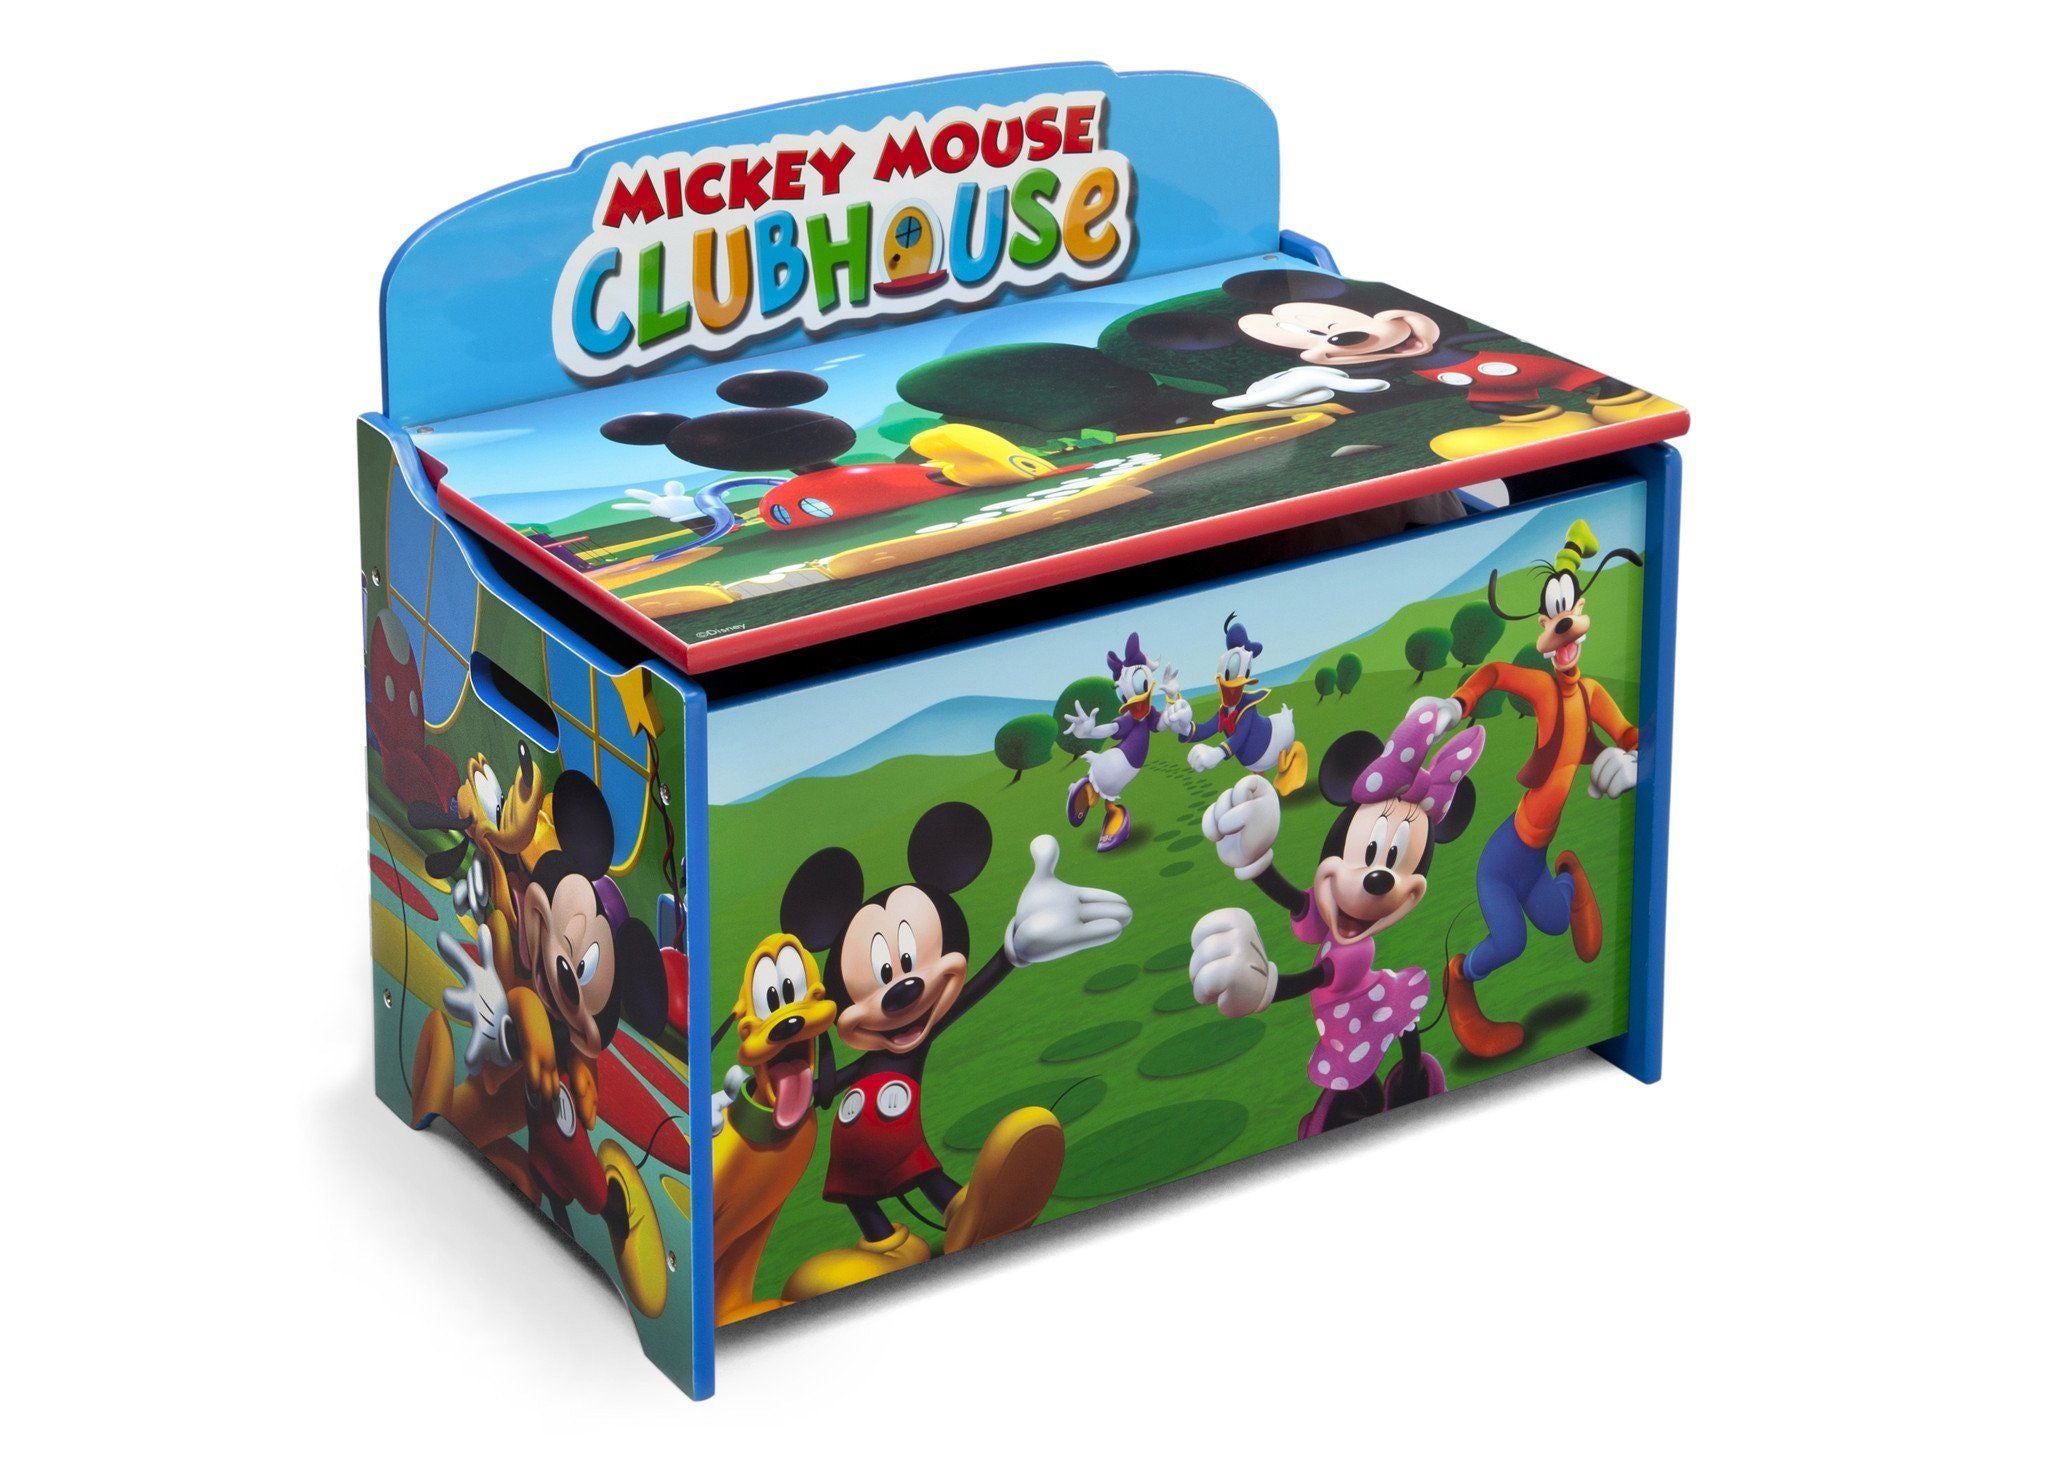 Minnie Mouse Clubhouse Toys for Kids 